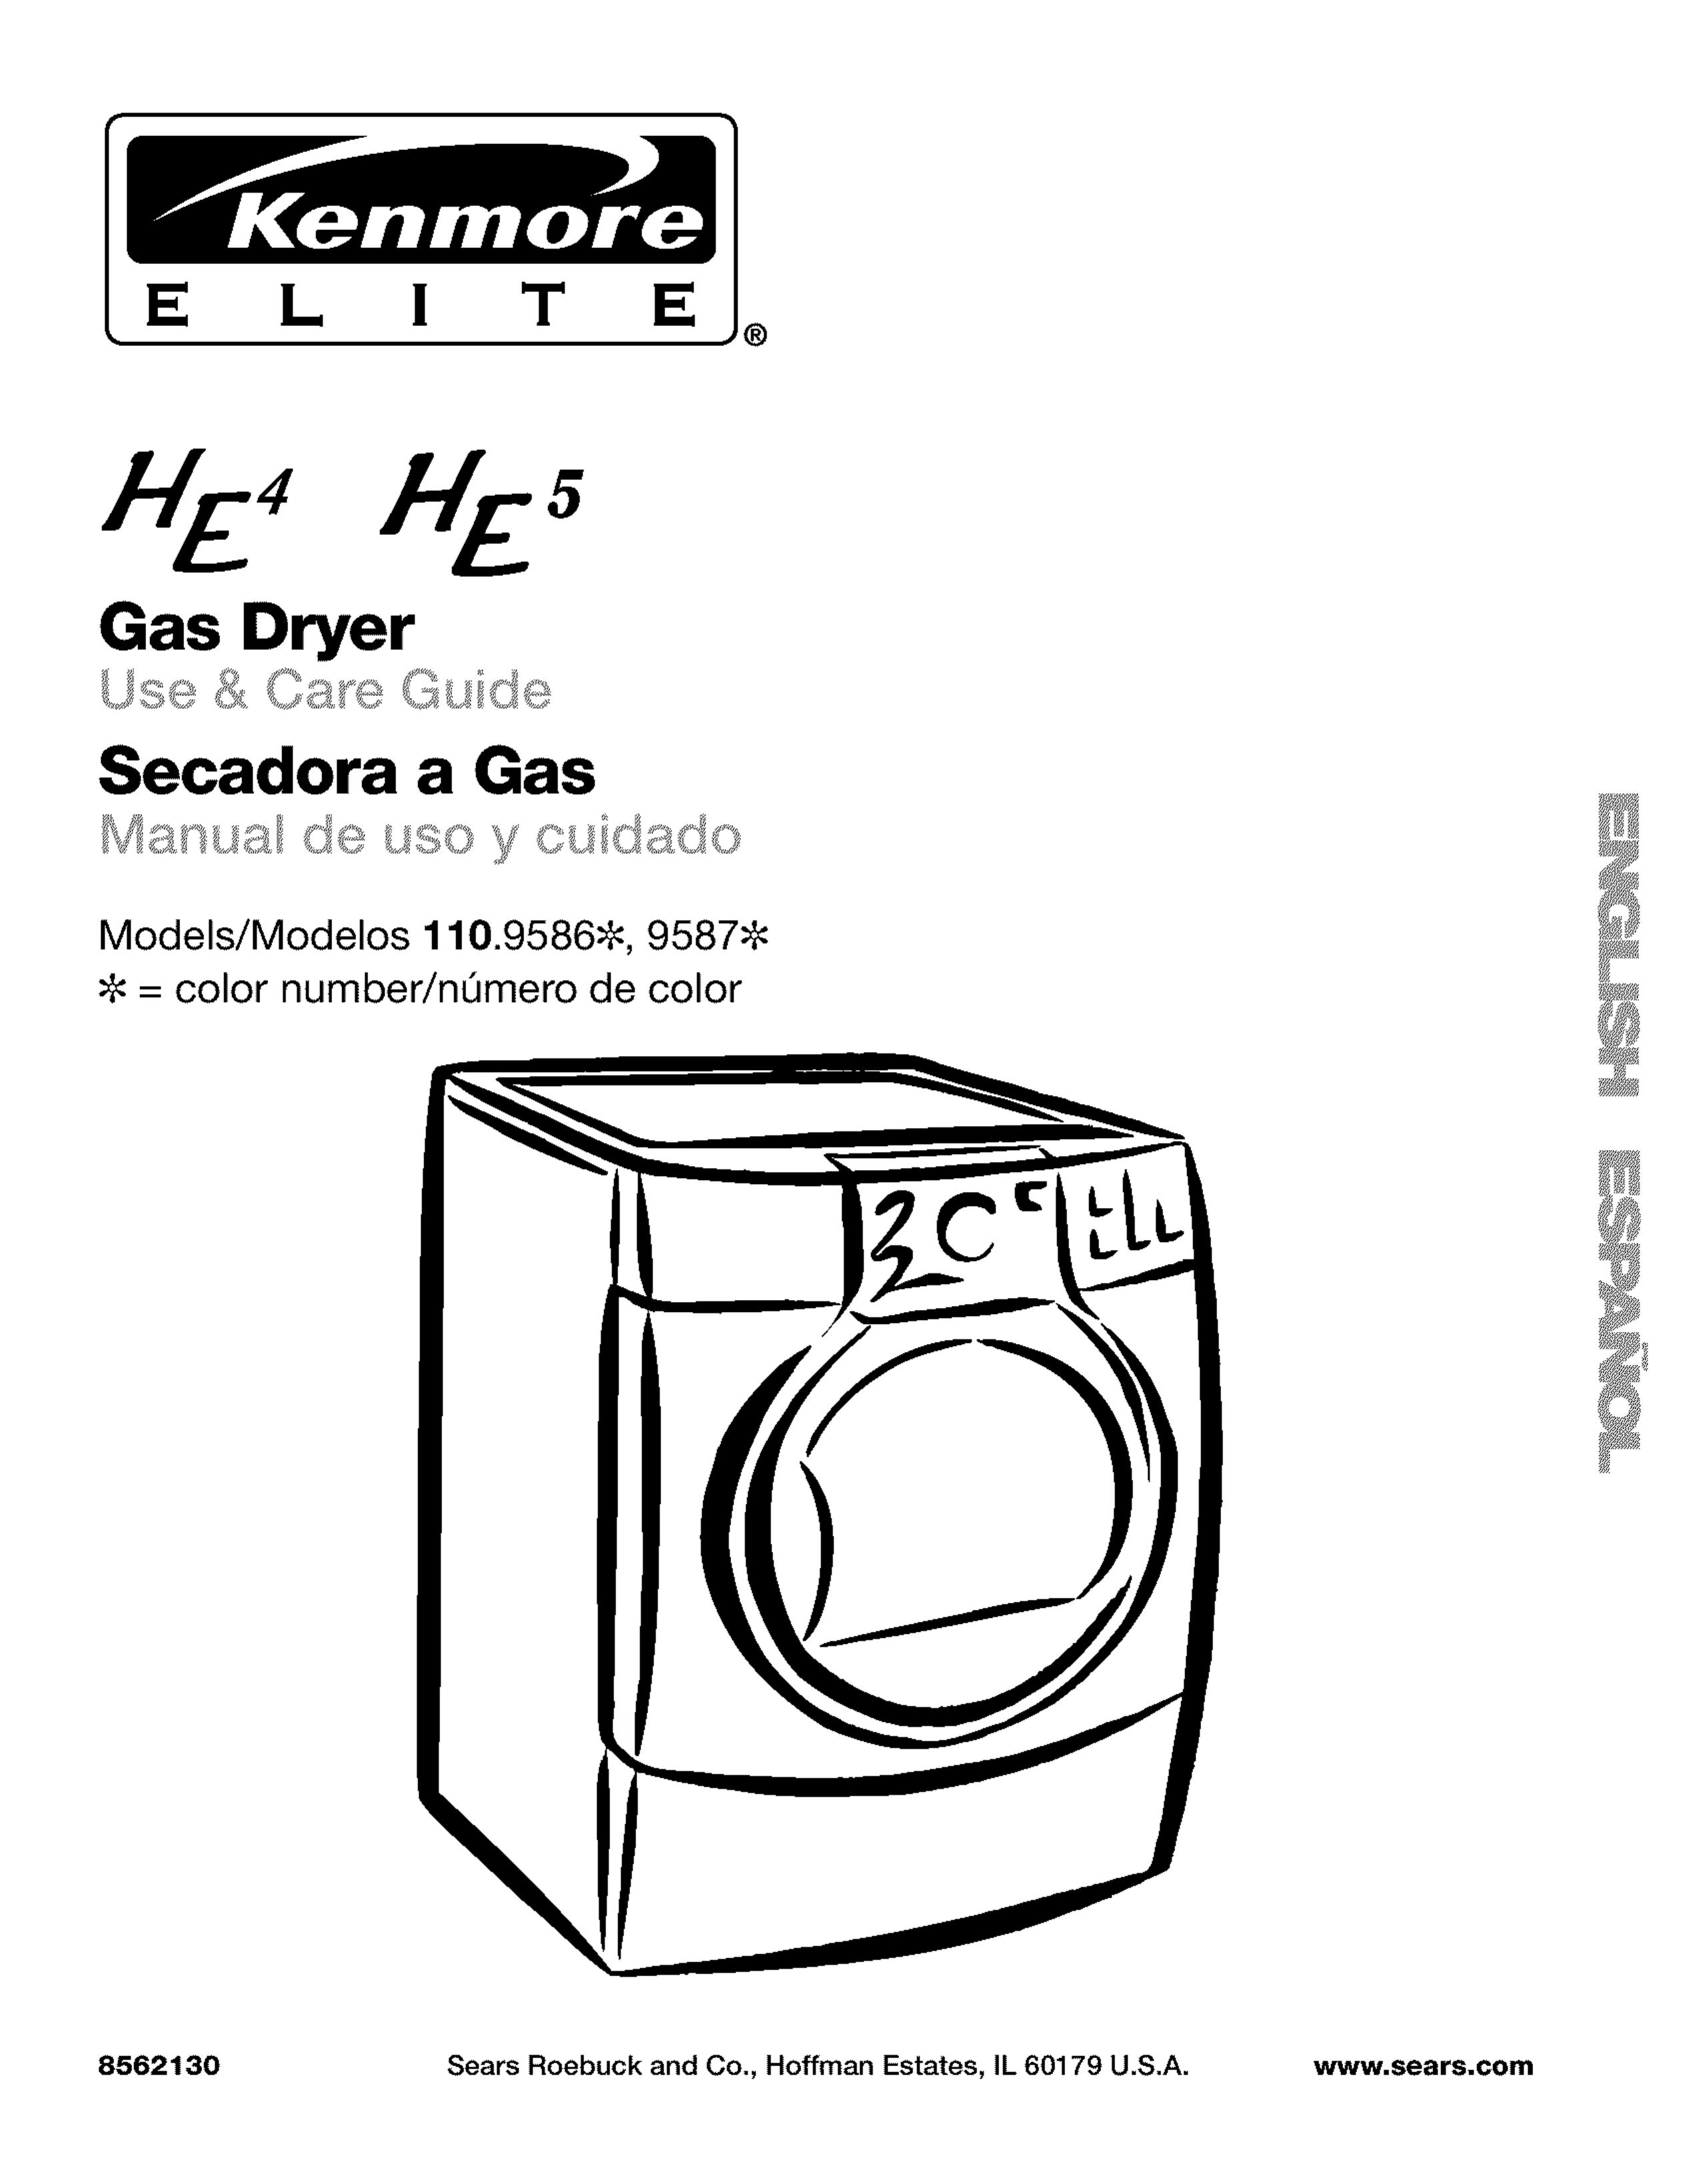 Kenmore 110.9586 Clothes Dryer User Manual